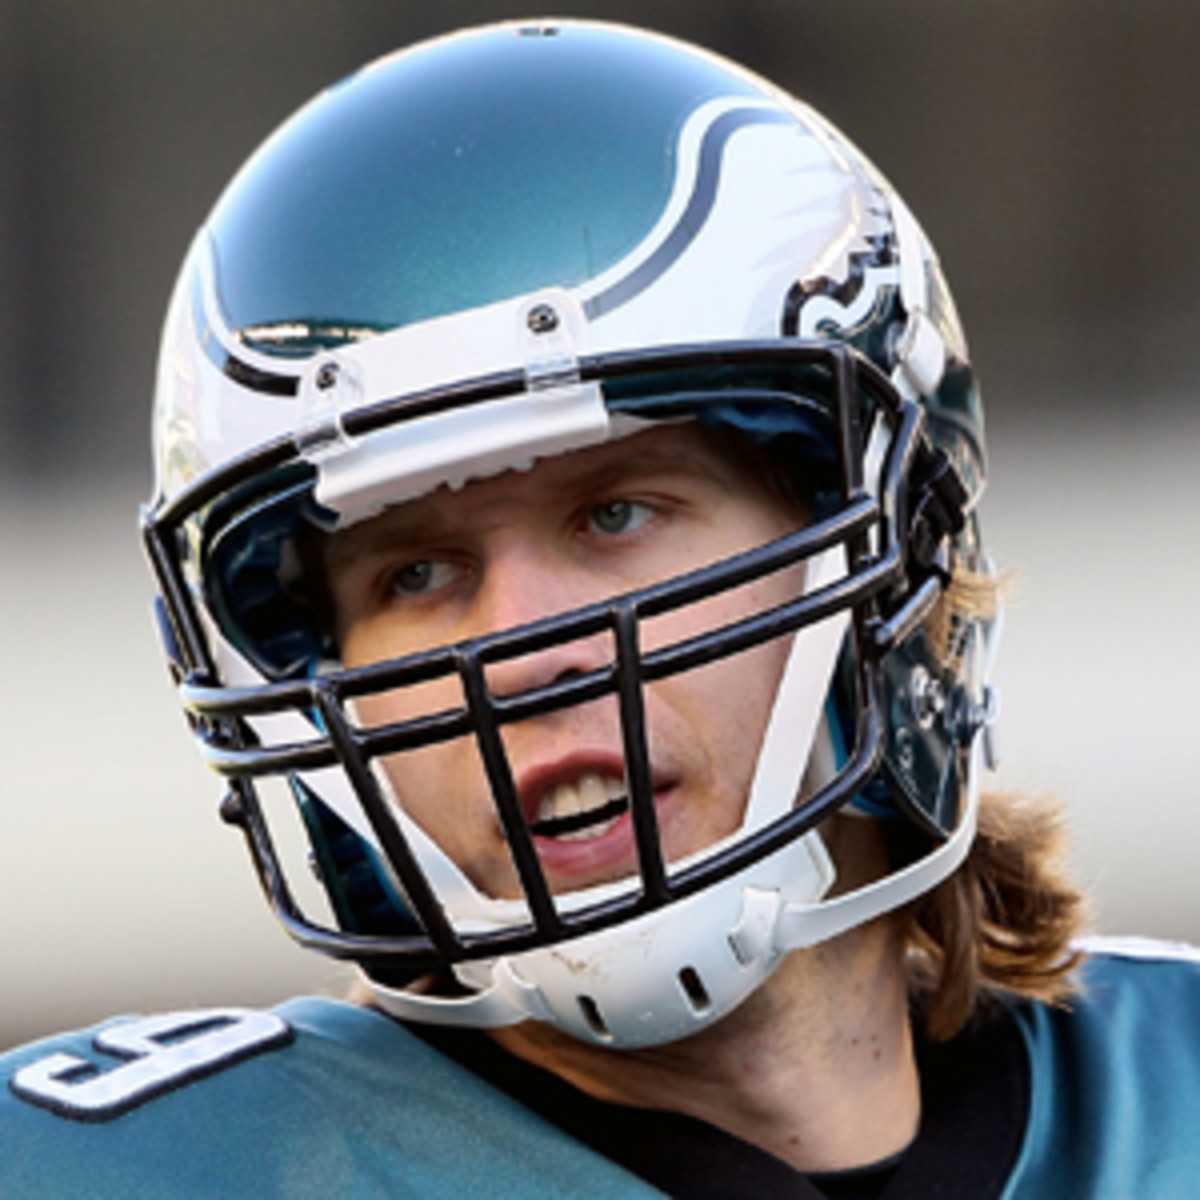 Nick Foles may not fit the dual-threat demands of new Eagles coach Chip Kelly's scheme. (Alex Trautwig/Getty Images)